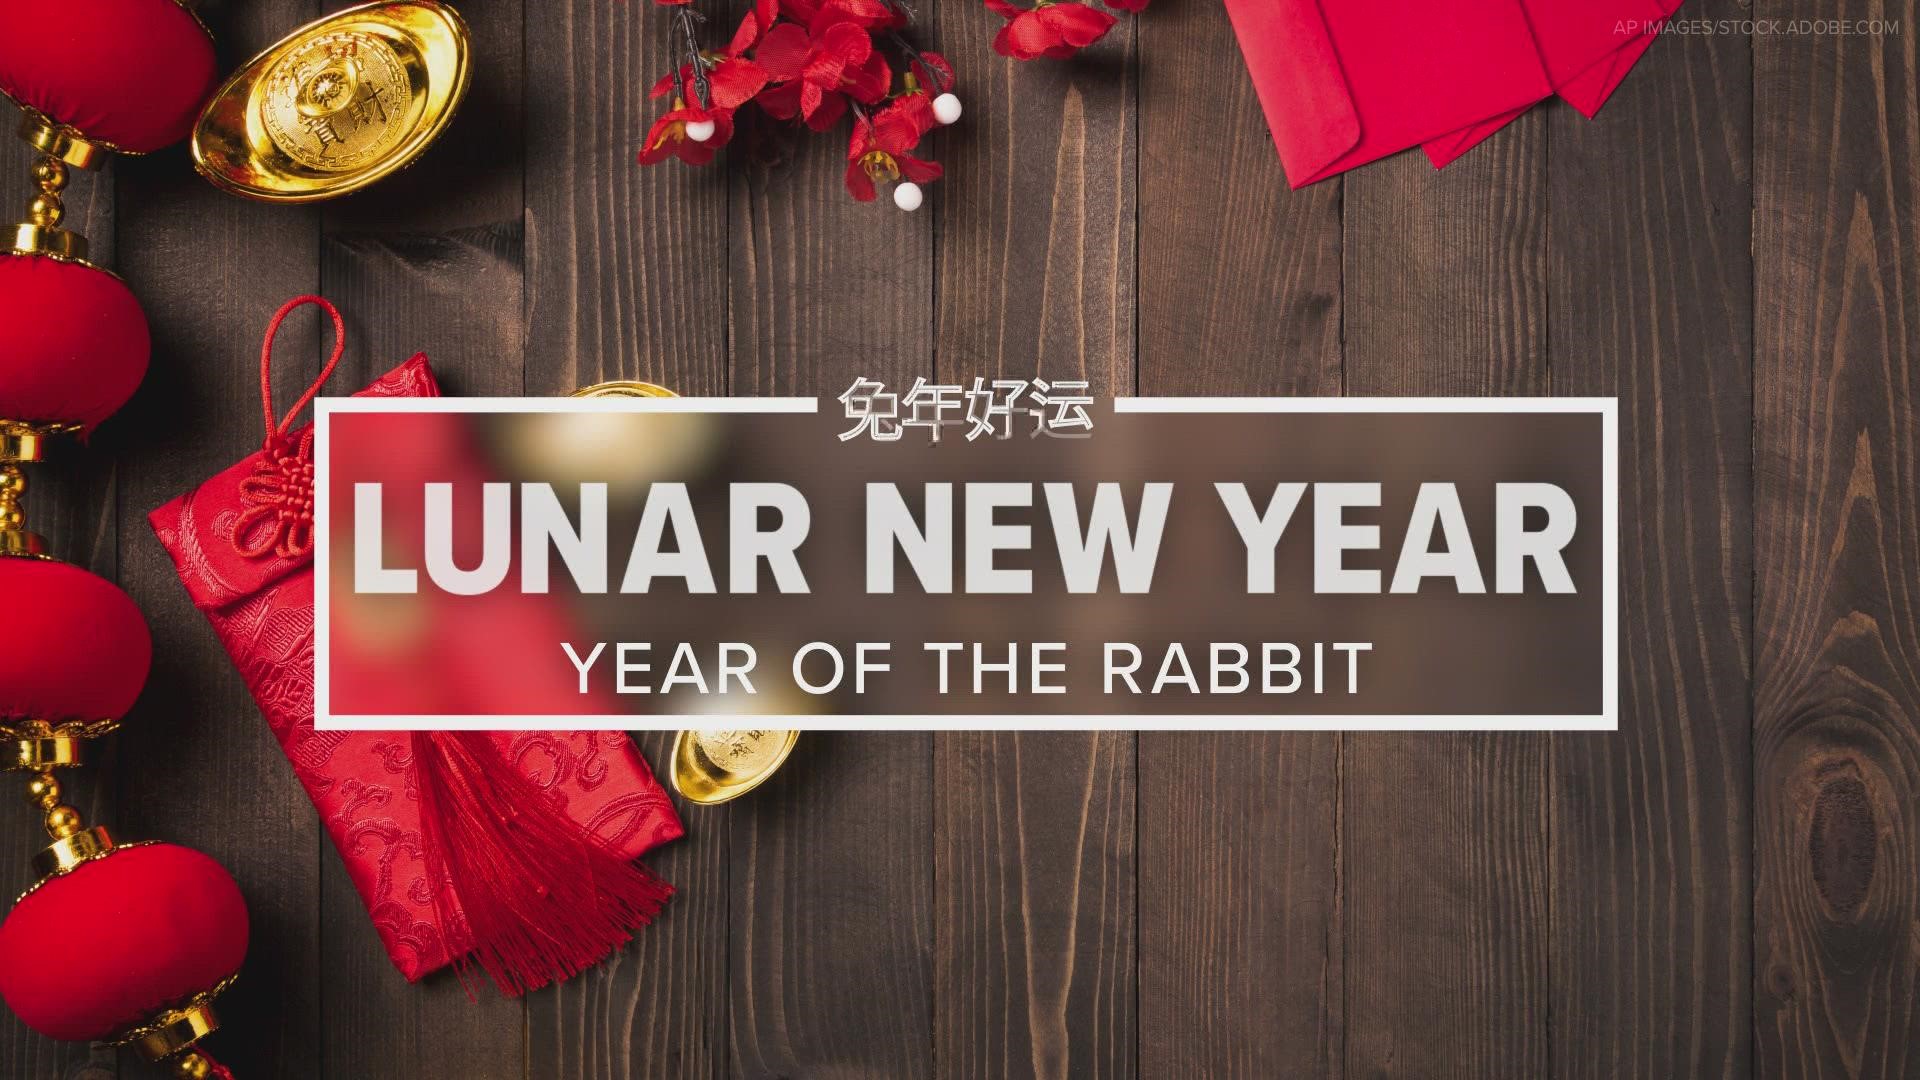 2023 is the year of the rabbit and is expected to be a peaceful, harmonious and tranquil year.